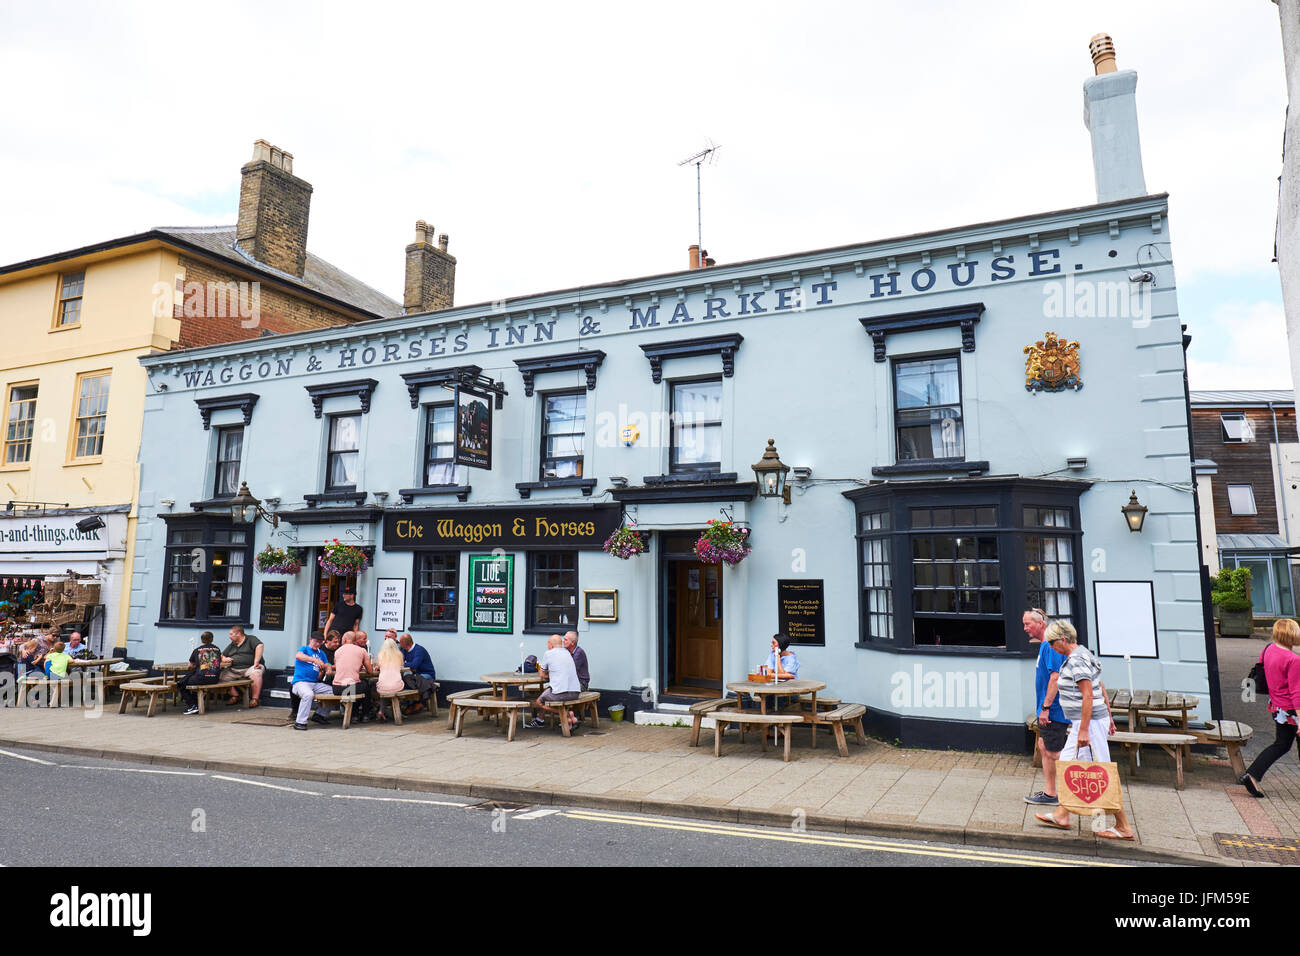 Wagon And Horses Inn And Market House, High Street, Newmarket, Suffolk, UK  Stock Photo - Alamy